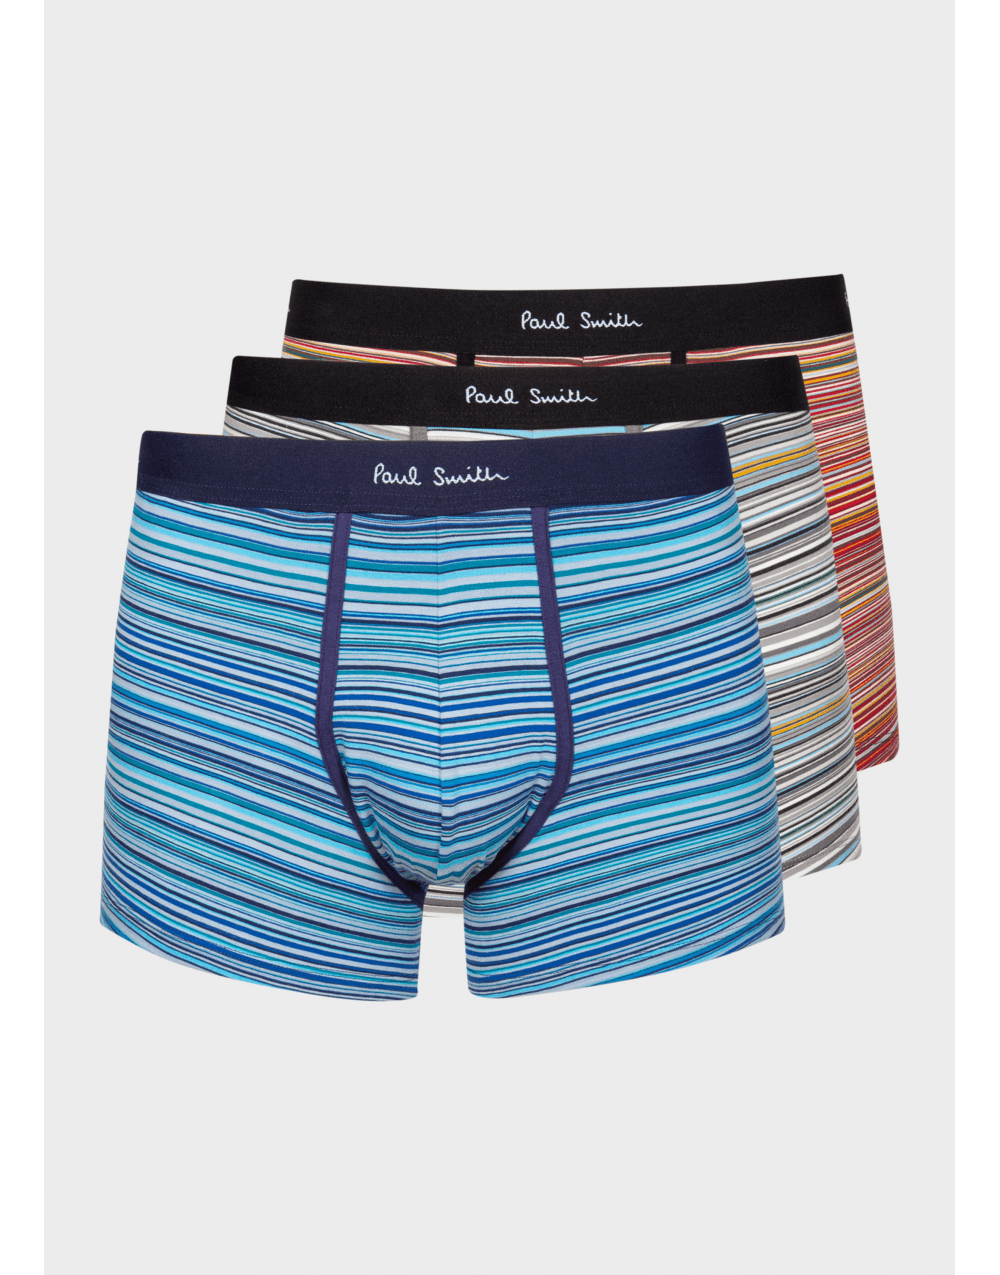 Paul Smith 3 Pack Underwear Col: Black With Red/purple/teal Waistband,